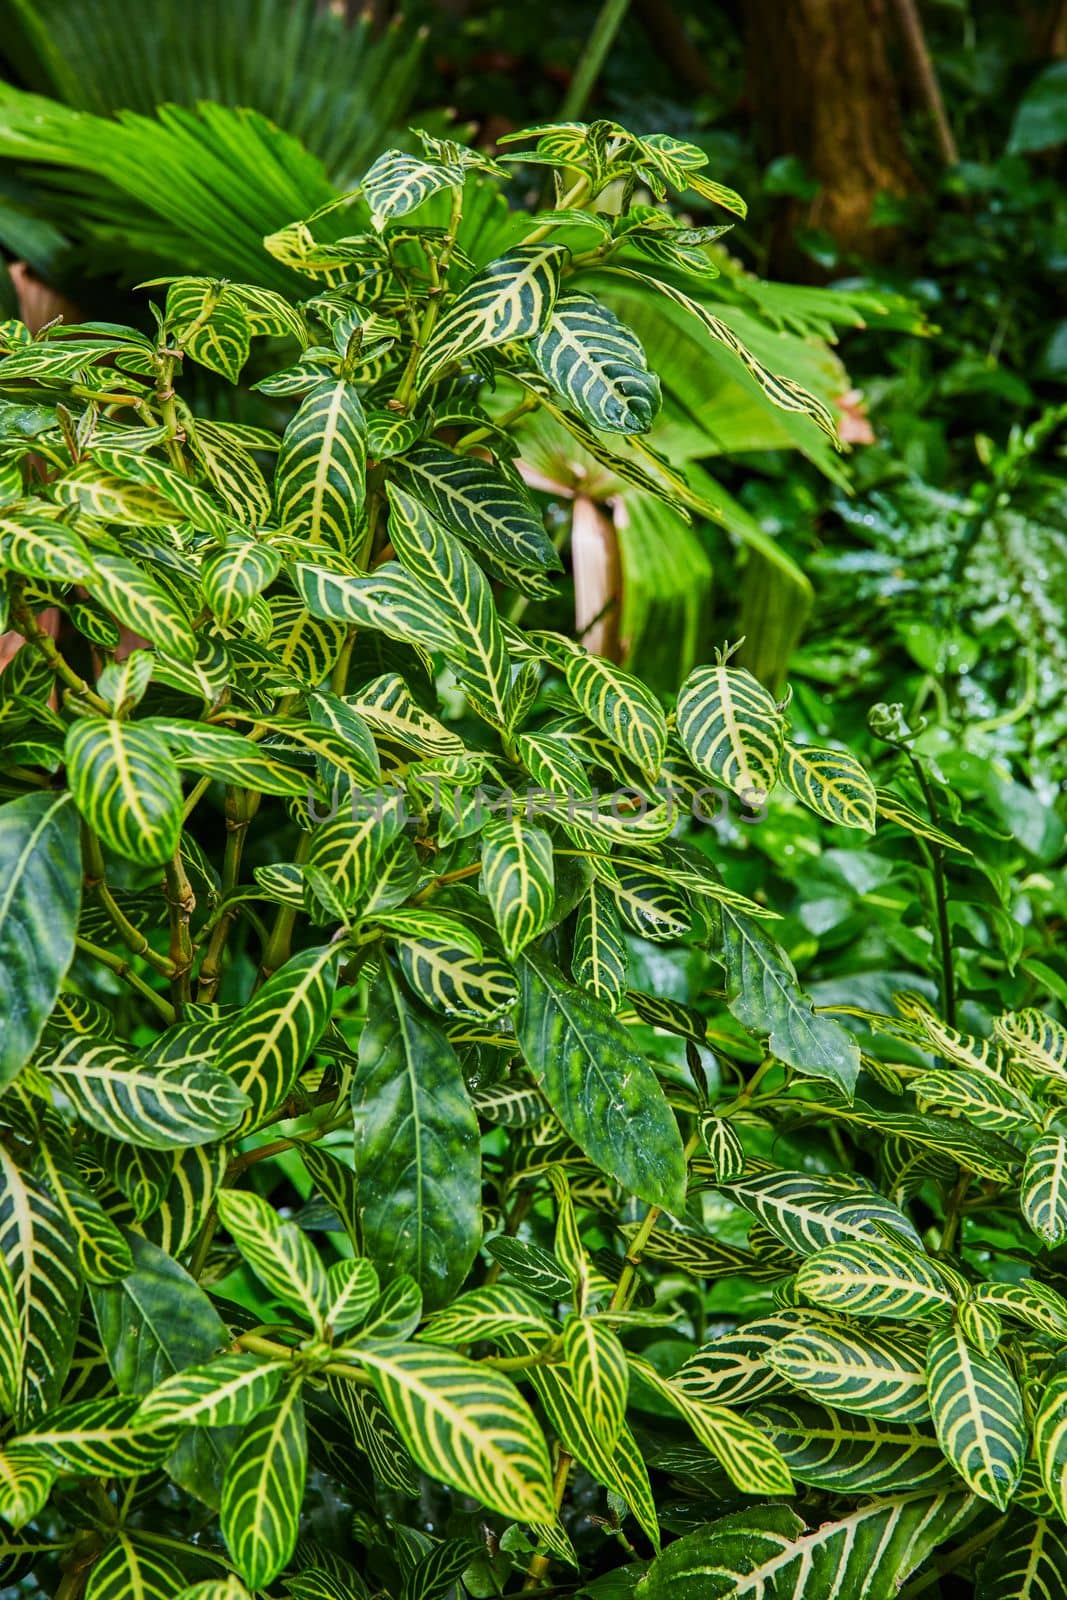 Image of Up close on rainforest ground plants with stripped leaves